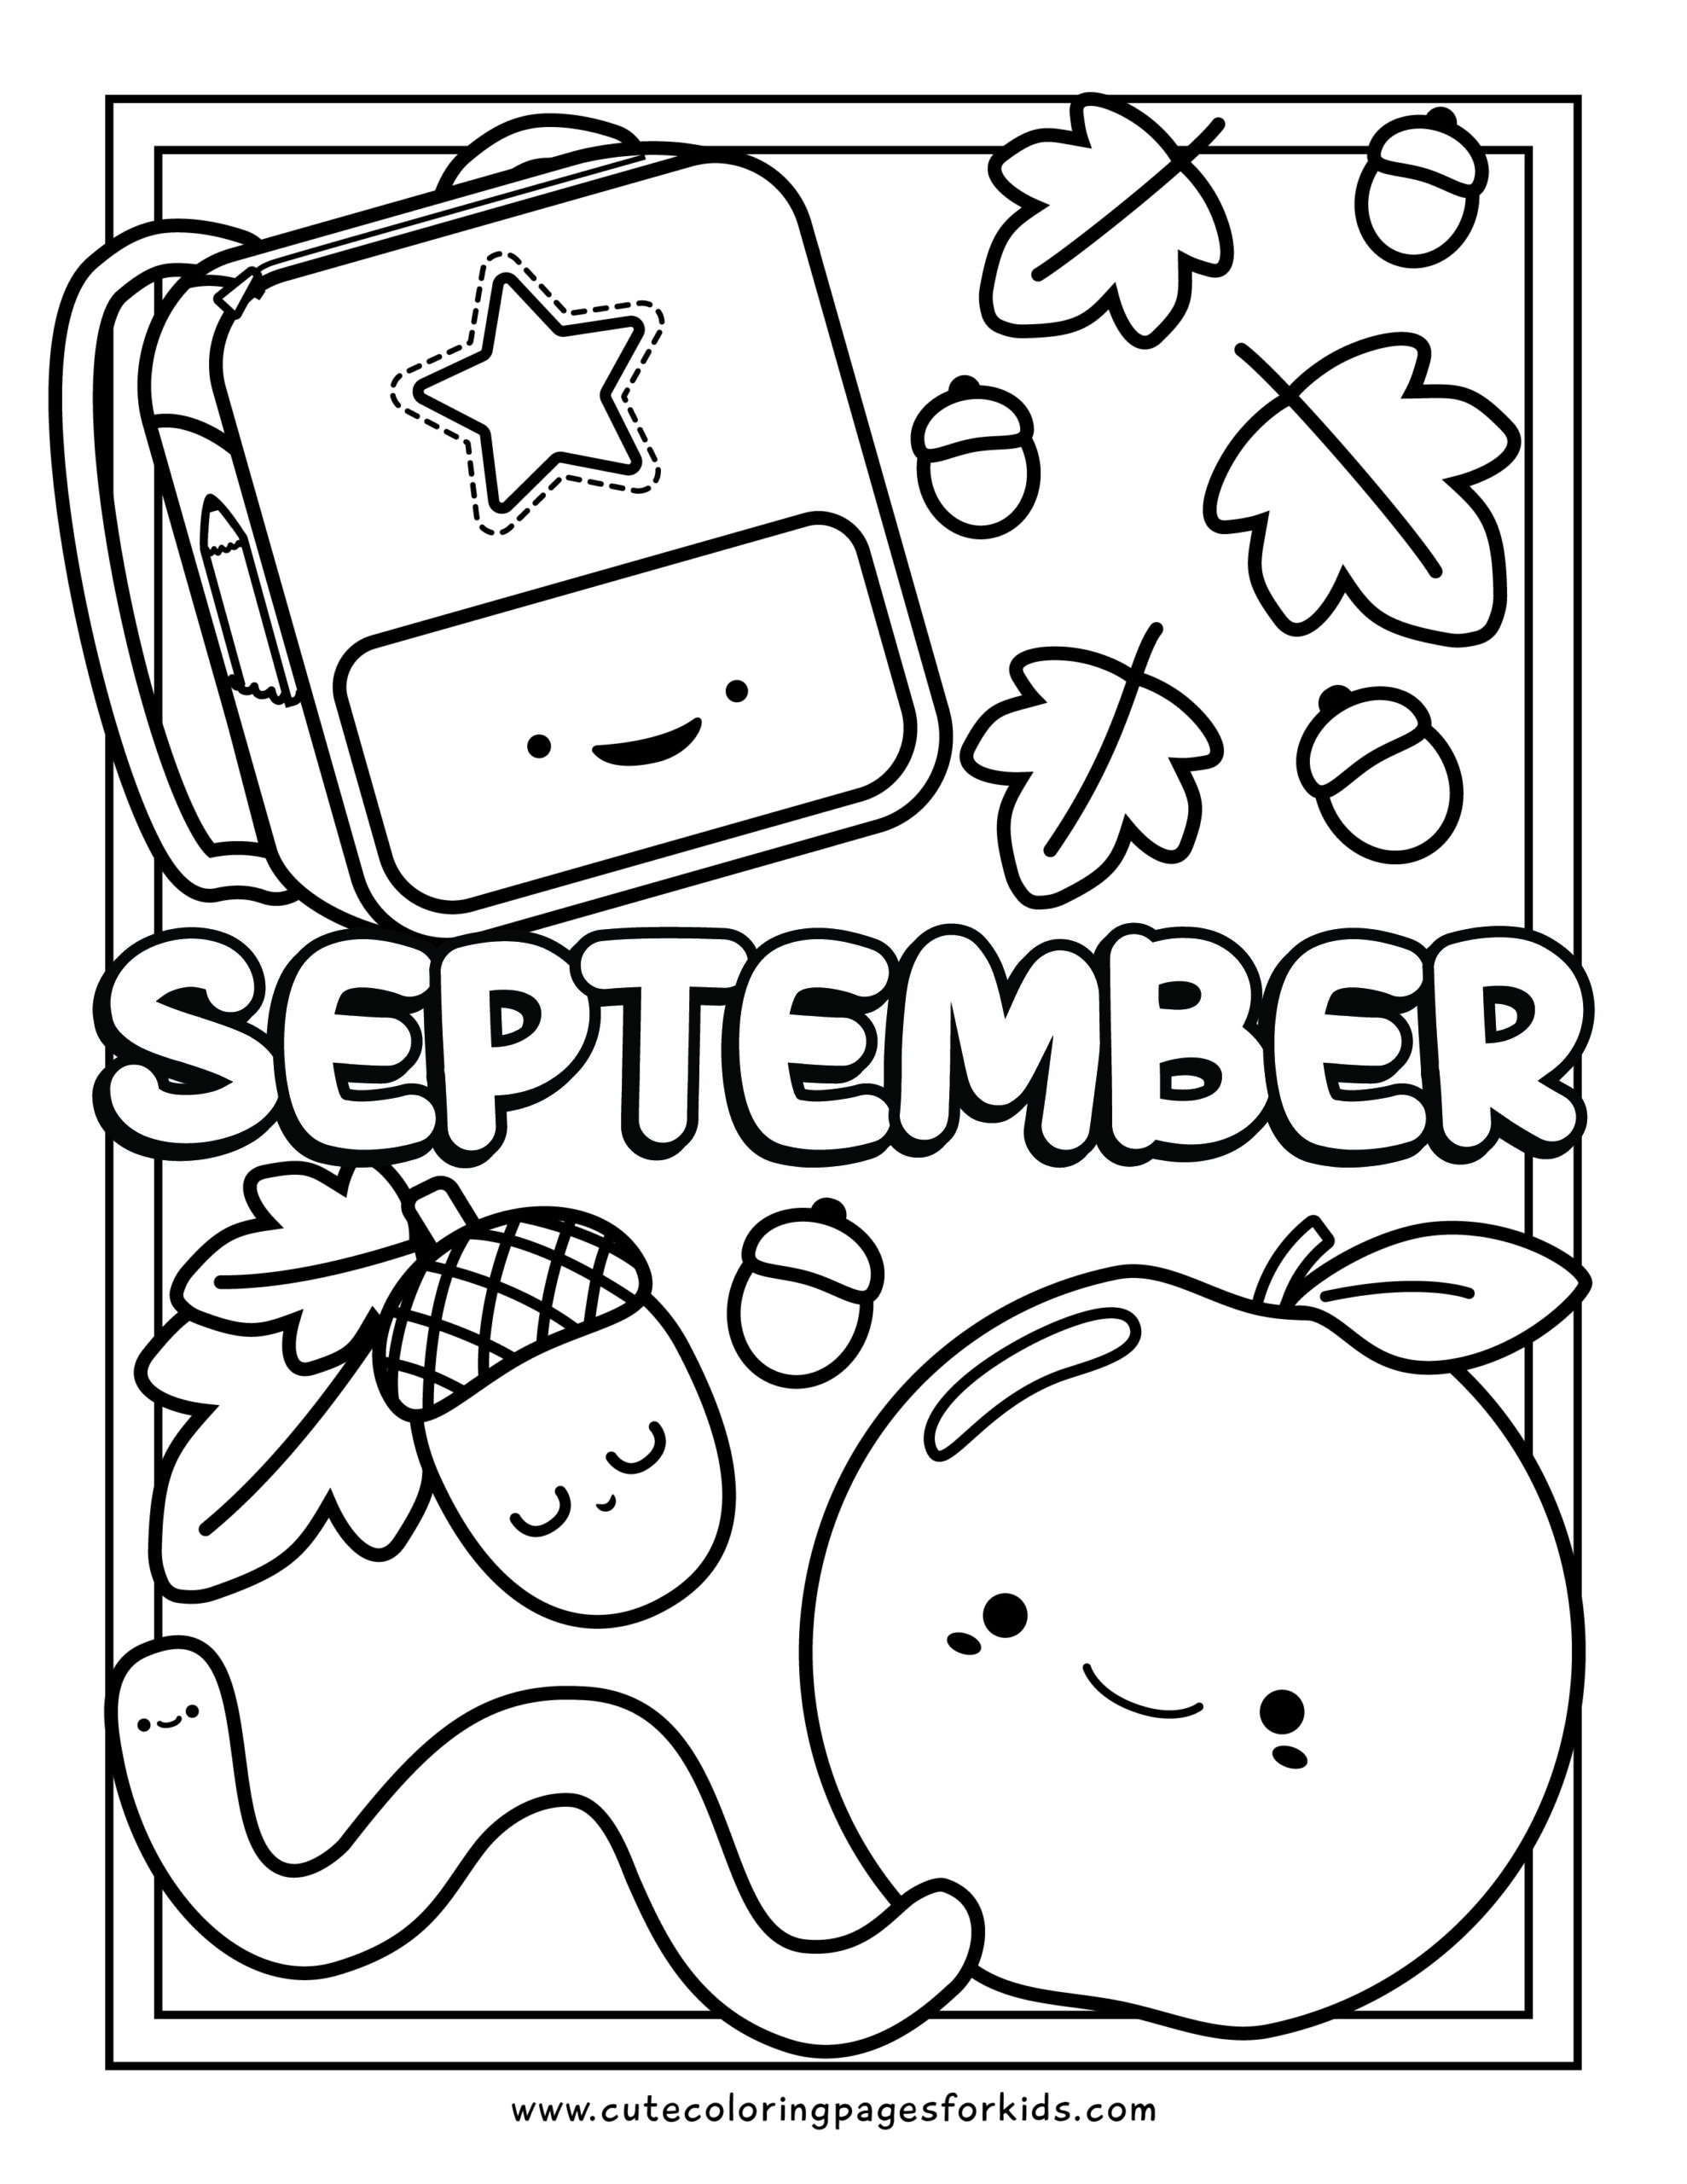 September coloring pages